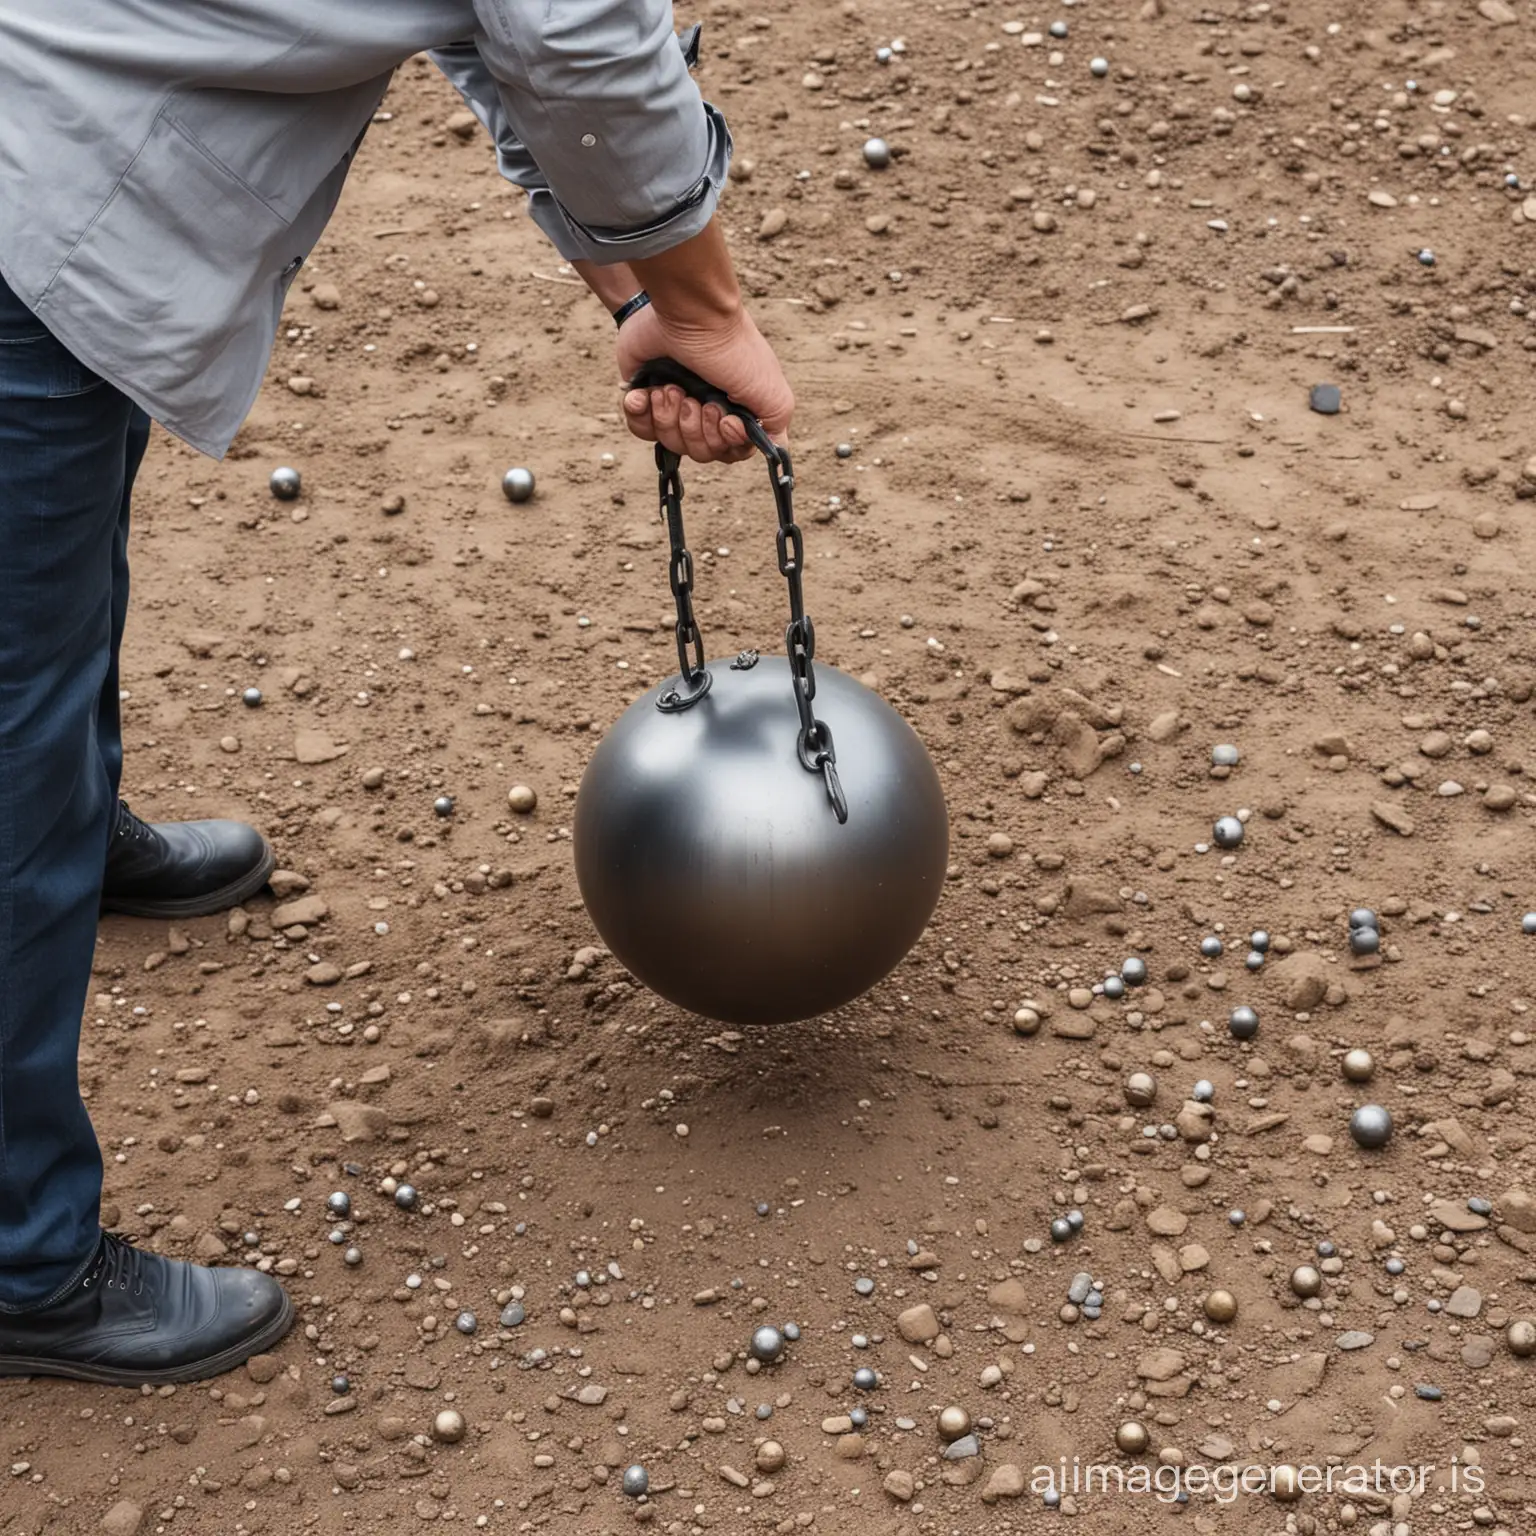 lifting the metal balls by a man from the ground